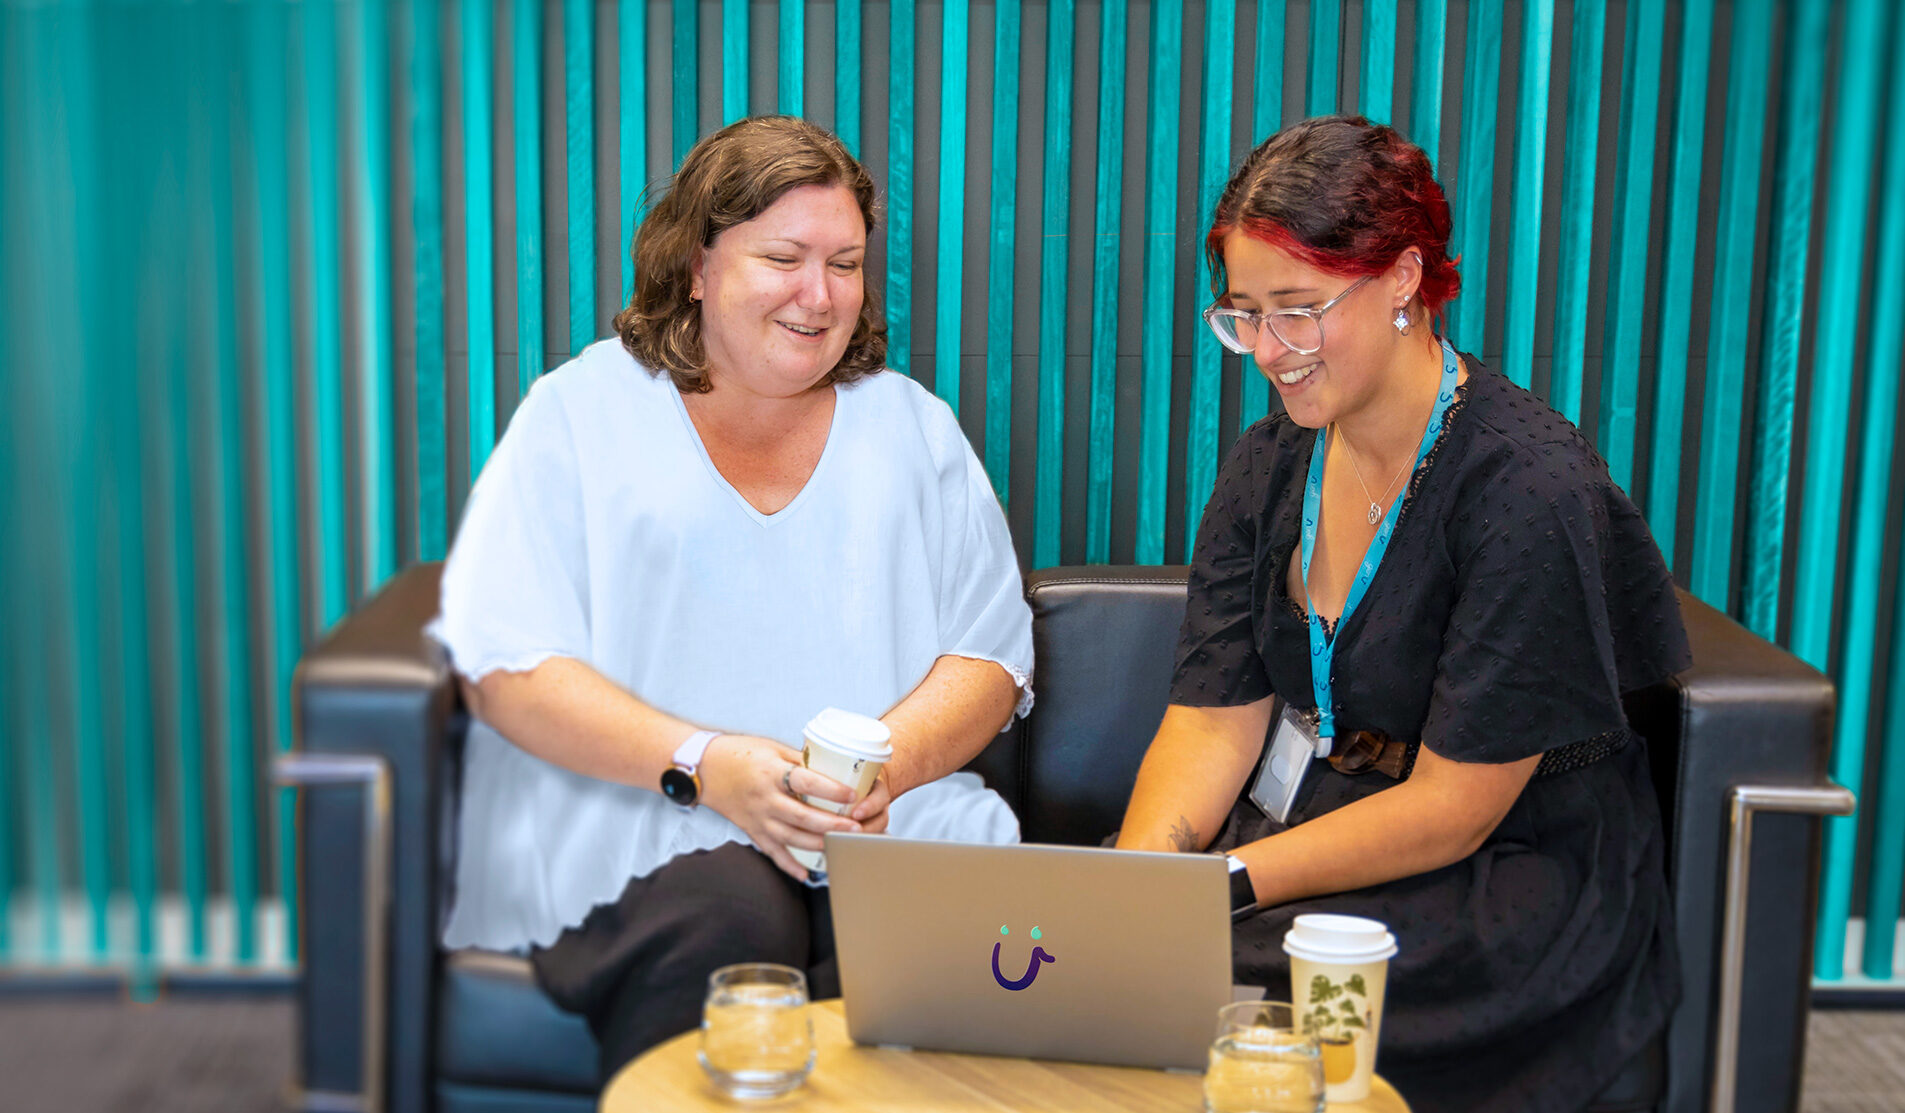 Two women looking at a laptop on a table and having a conversation